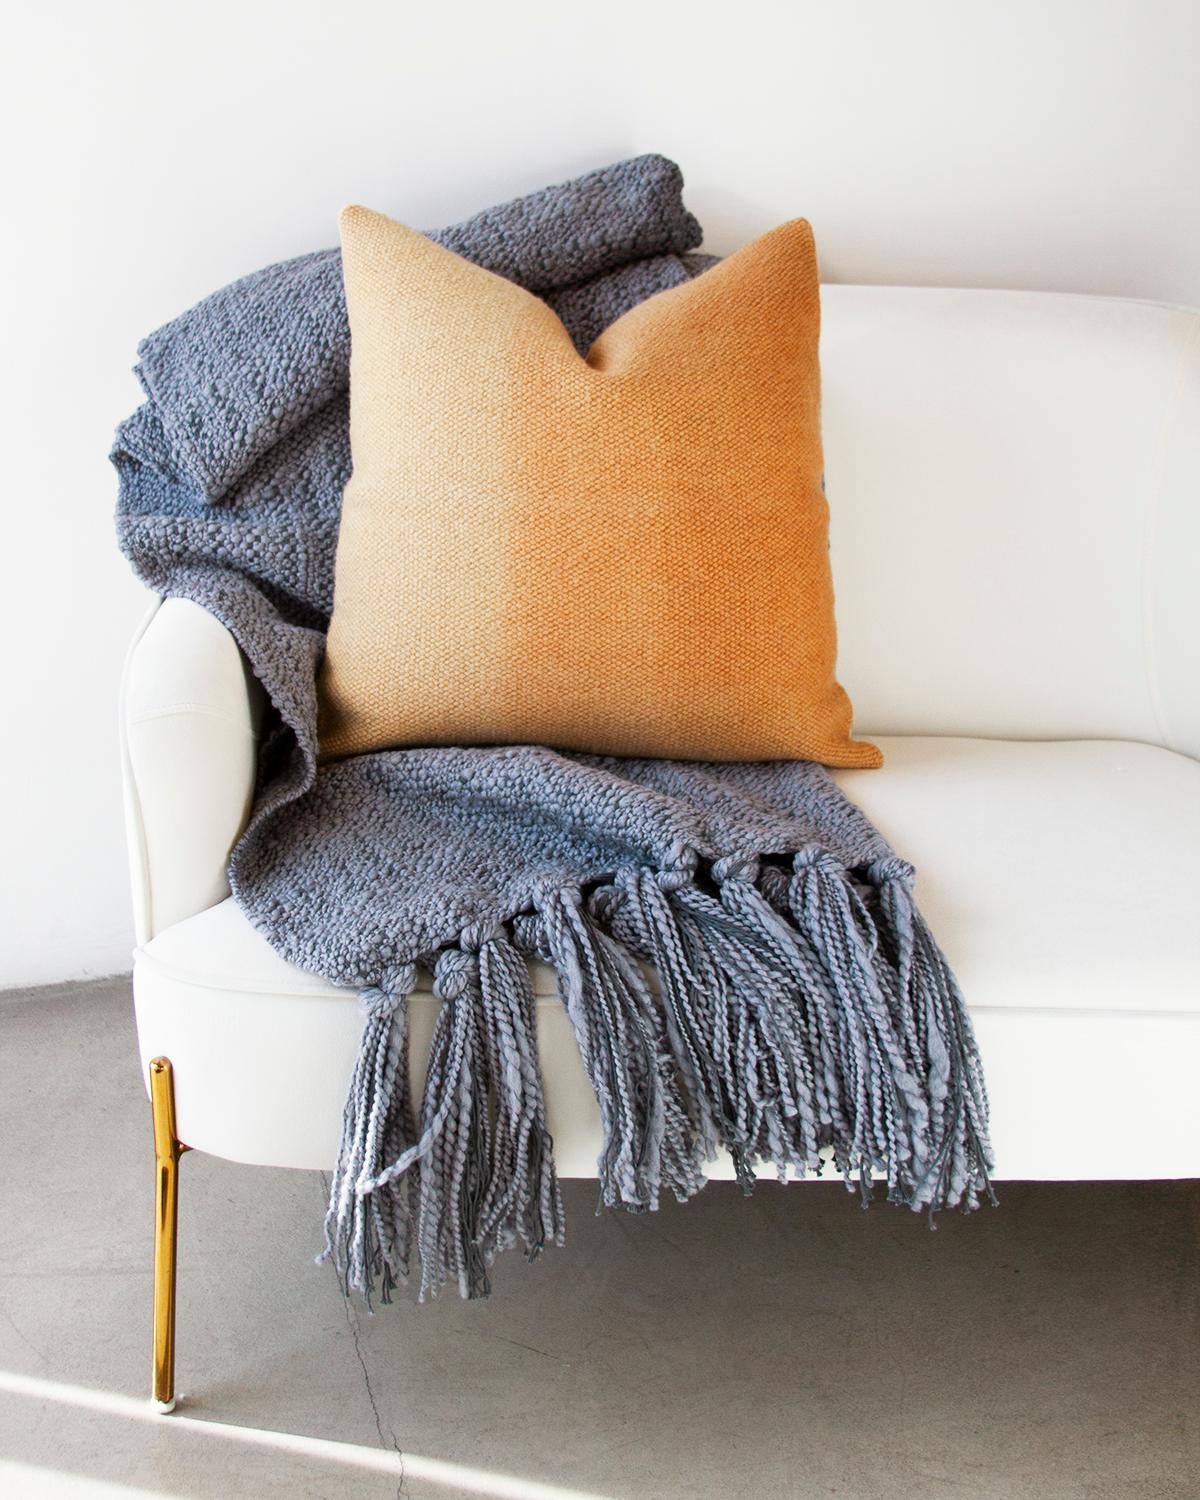 Add some color to your couch. This Matiz Gold Ombre Throw Pillow provides a unique way to add organic modern style to your home décor. Hand-woven from sheep wool, the ombre effect is achieved with plant dyes in amber yellow and orange hues that give